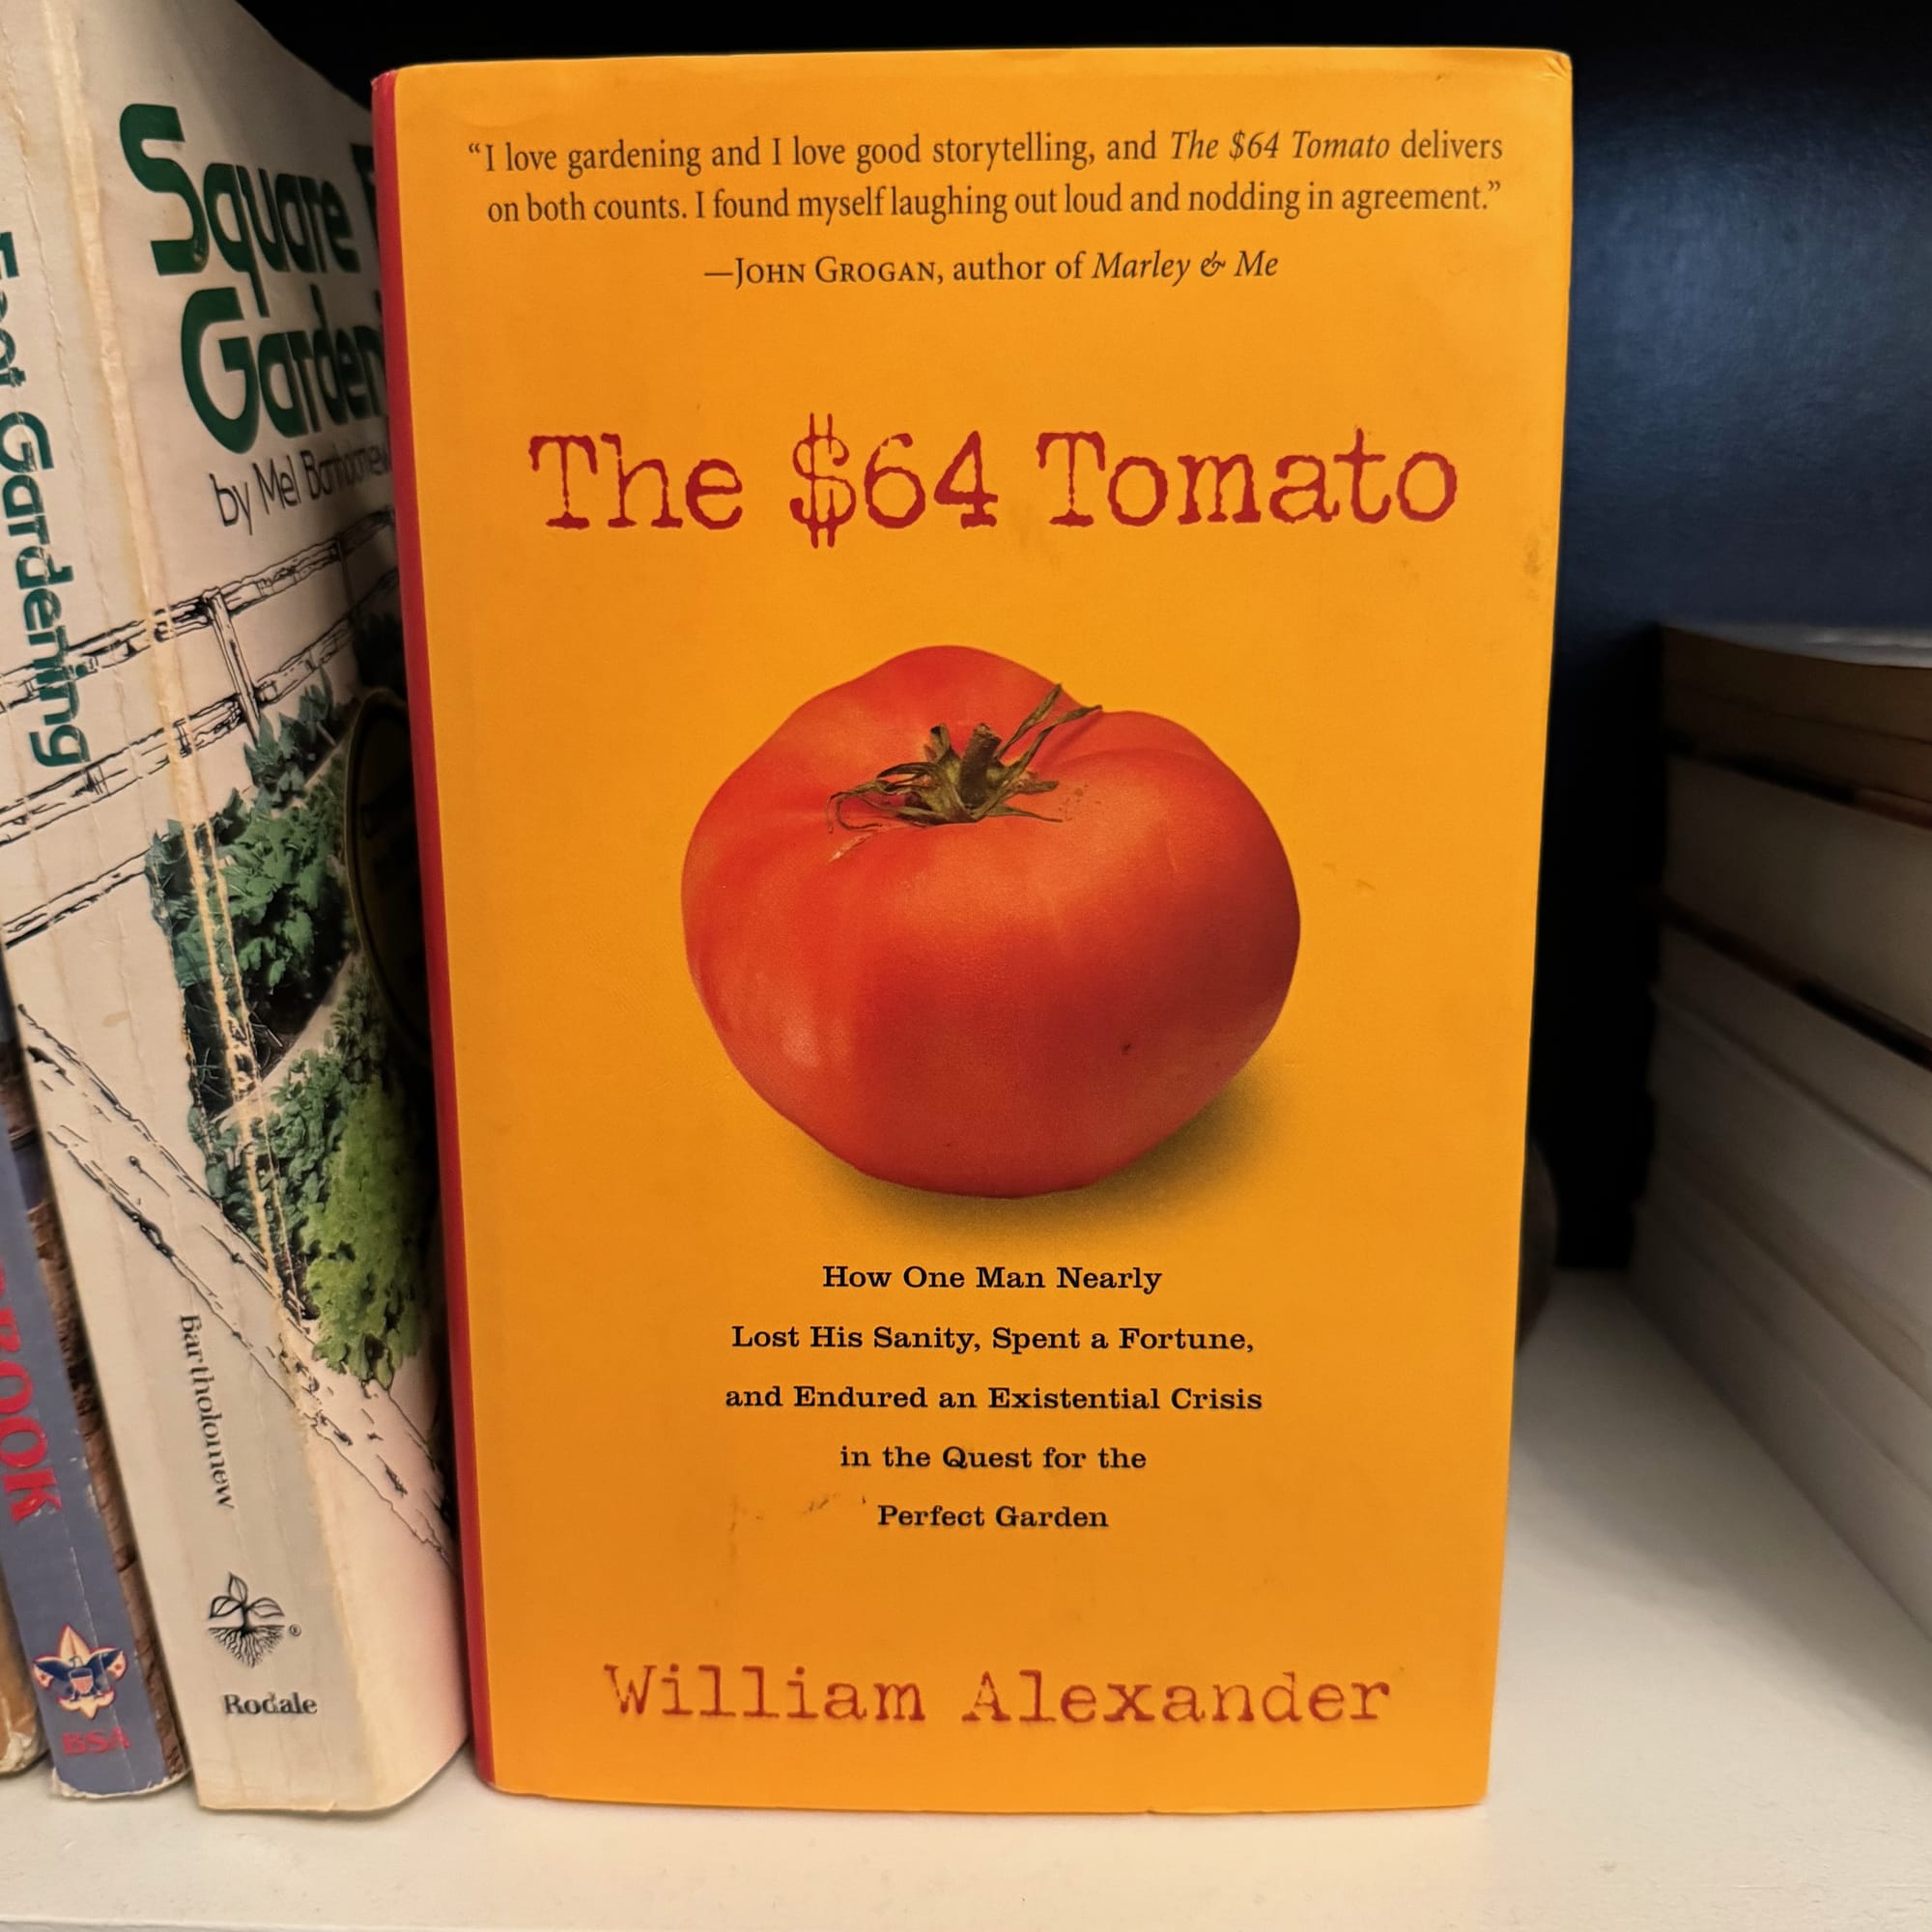 The $64 Tomato: How One Man Nearly Lost His Sanity, Spent a Fortune, and Endured an Existential Crisis in the Quest for the Perfect Garden